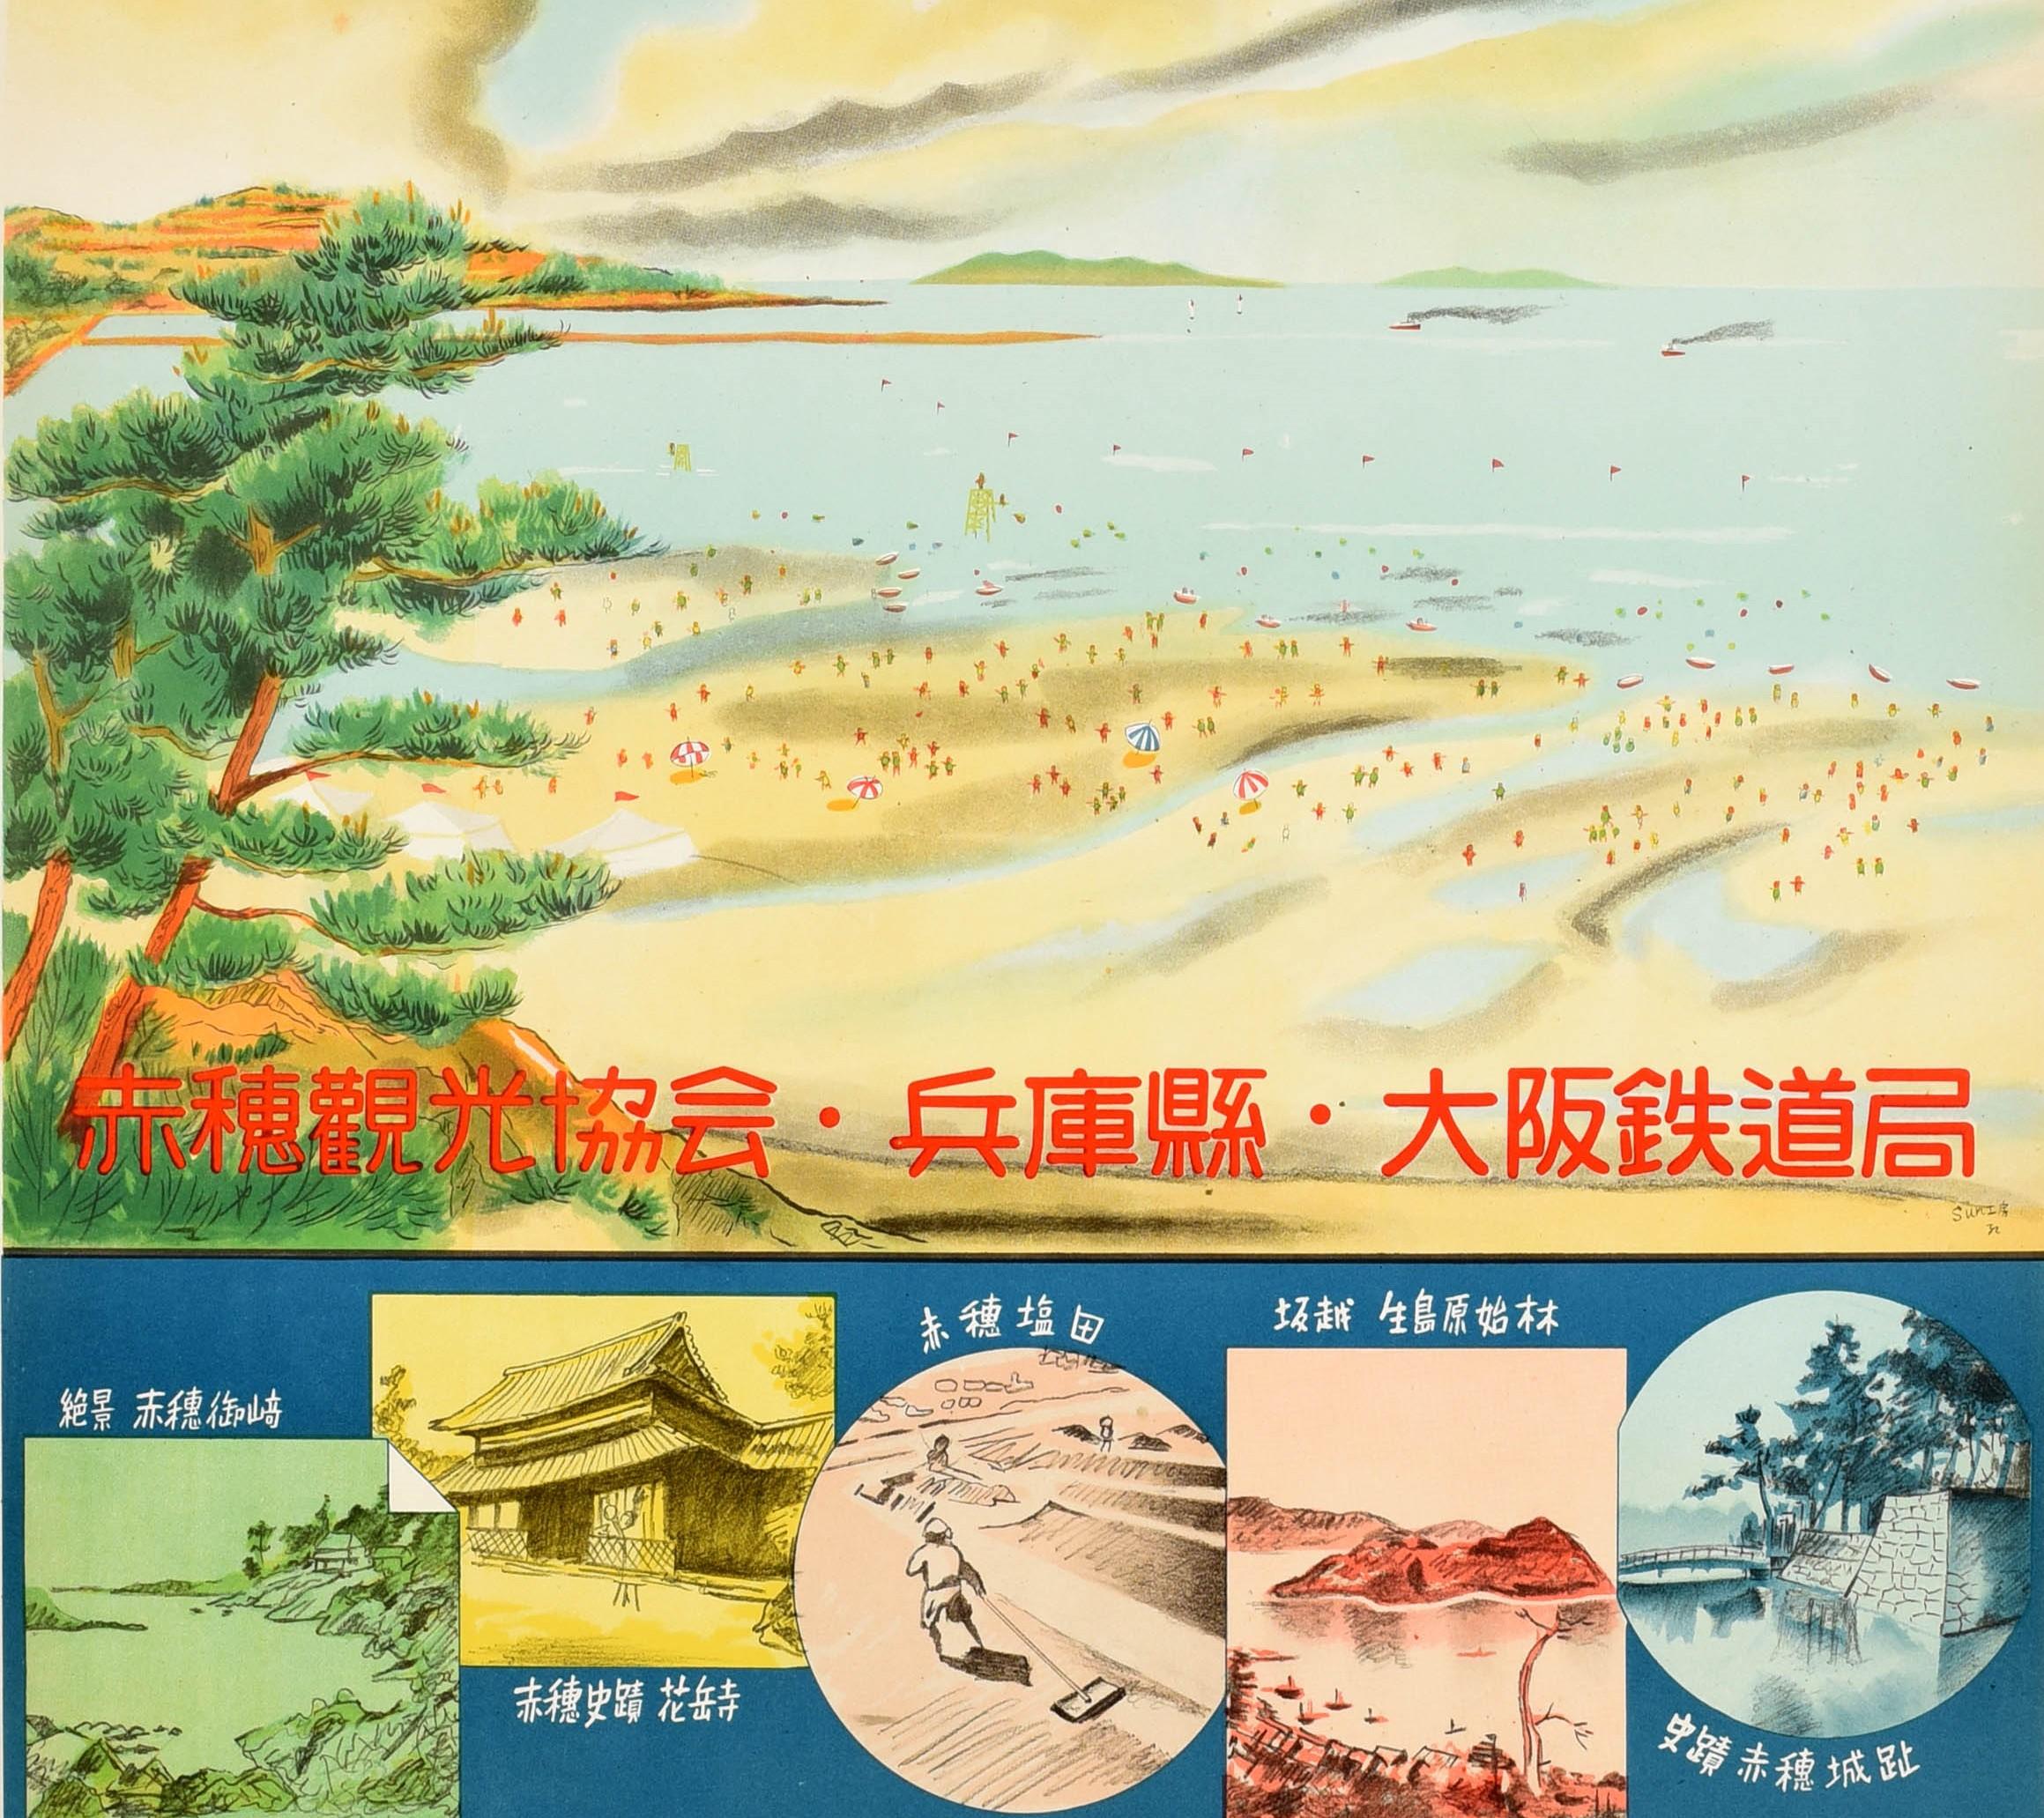 Original Vintage Travel Poster Fukuura Beach Japan Scenic Coast View Island Art In Good Condition For Sale In London, GB